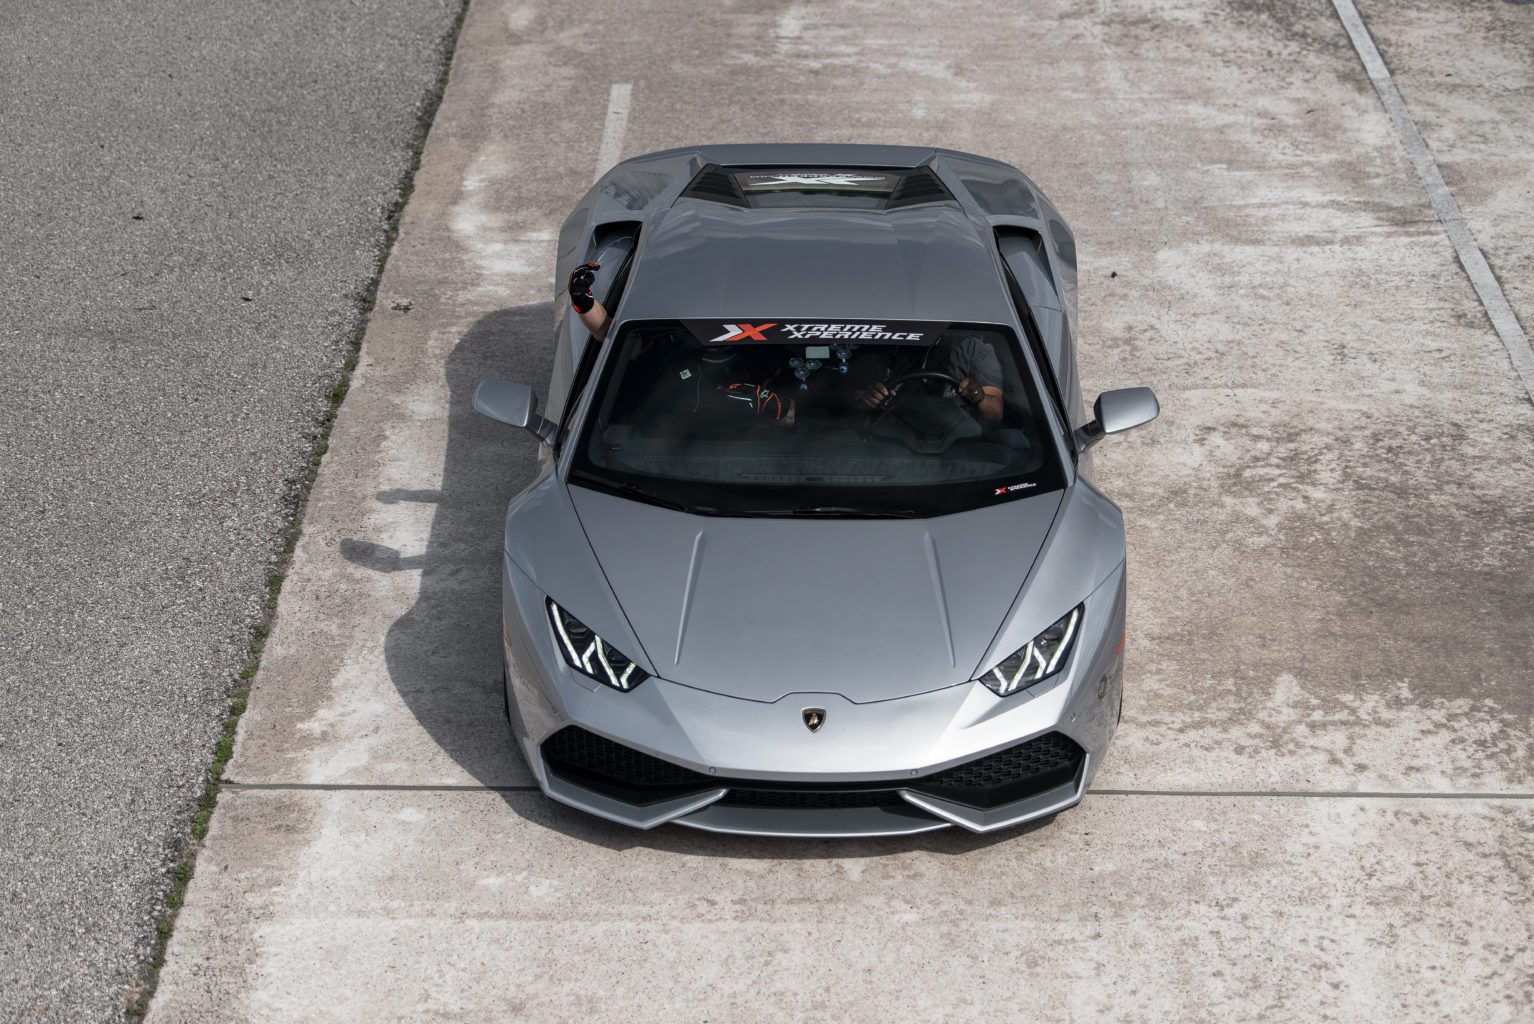 Xtreme Xperience's Lamborghini Huracan parked on a racetrack.